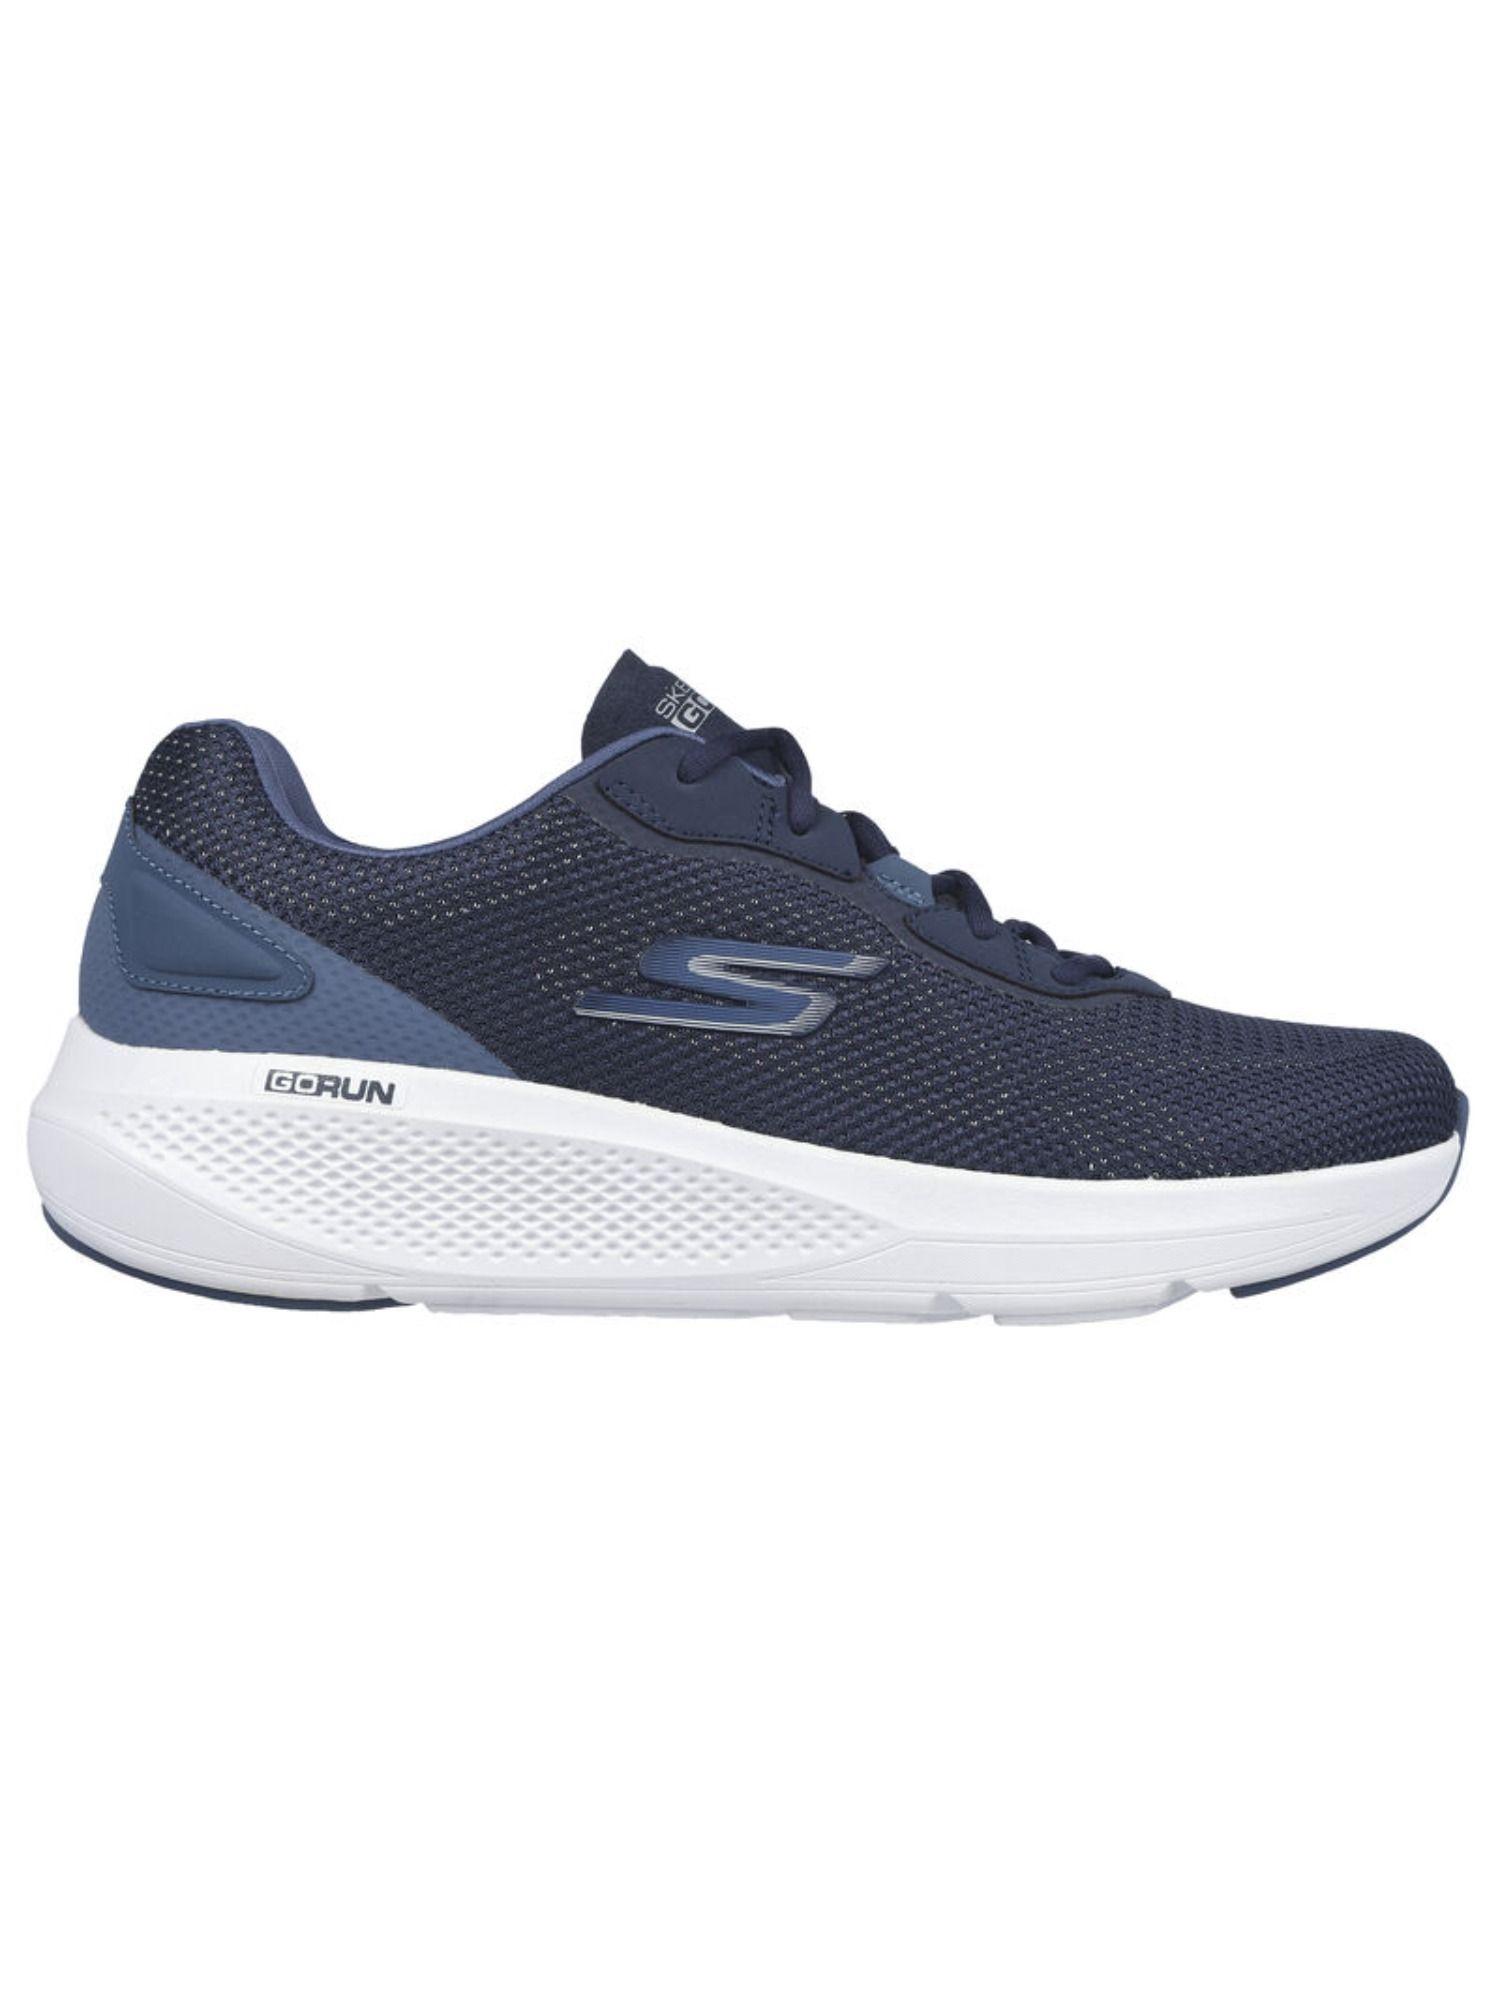 GO RUN ELEVATE Navy Blue Running Shoes